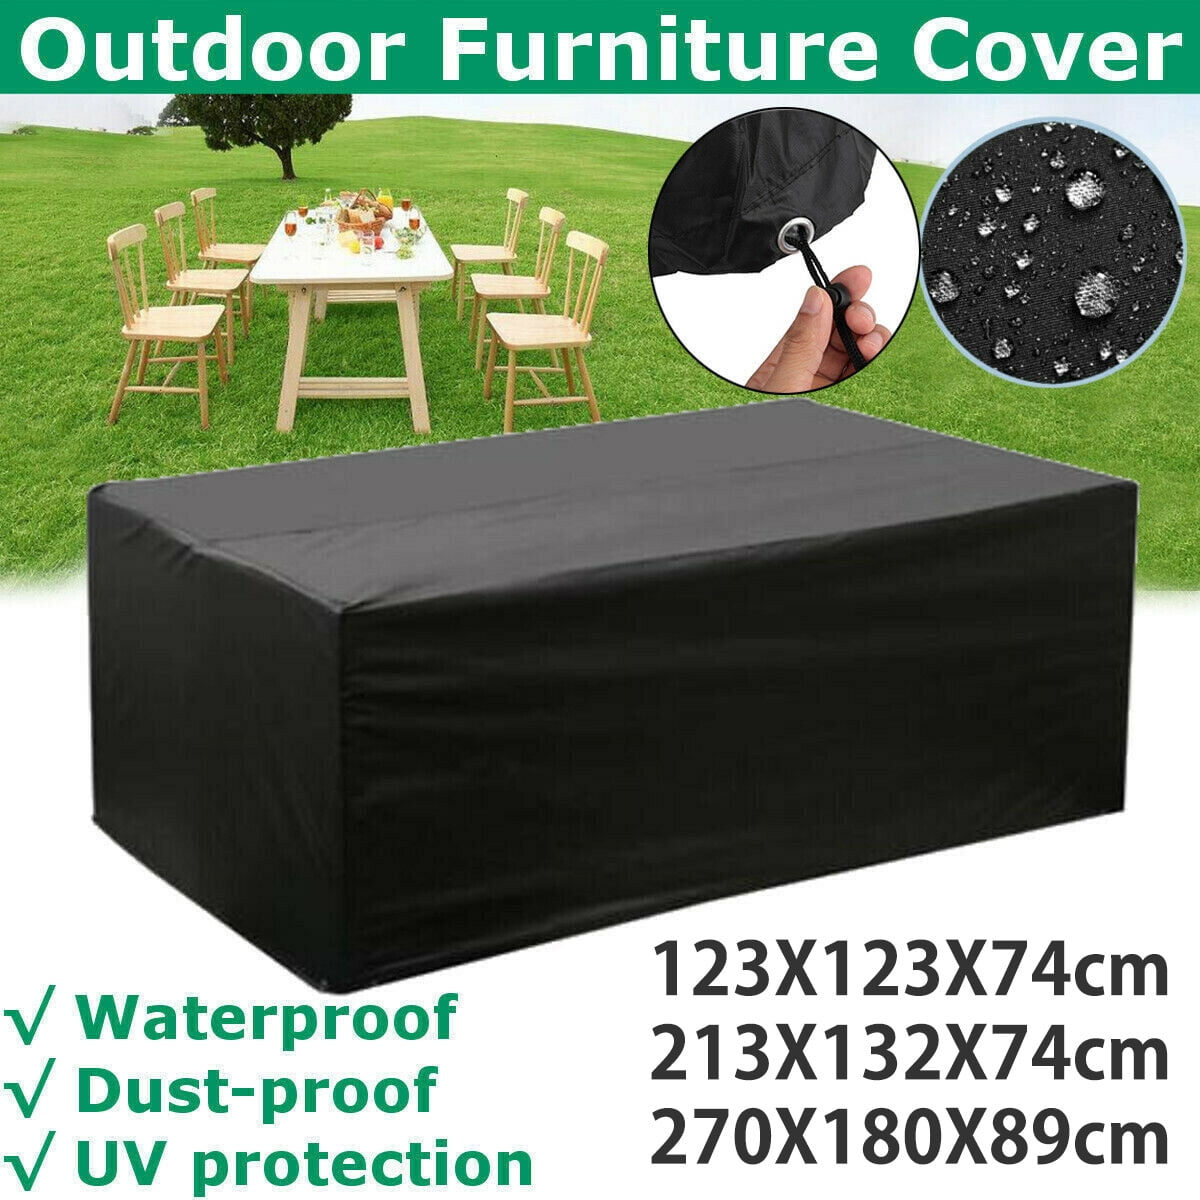 Large Round Waterproof Furniture Cover Outdoor Garden Patio Table Chair Covers 